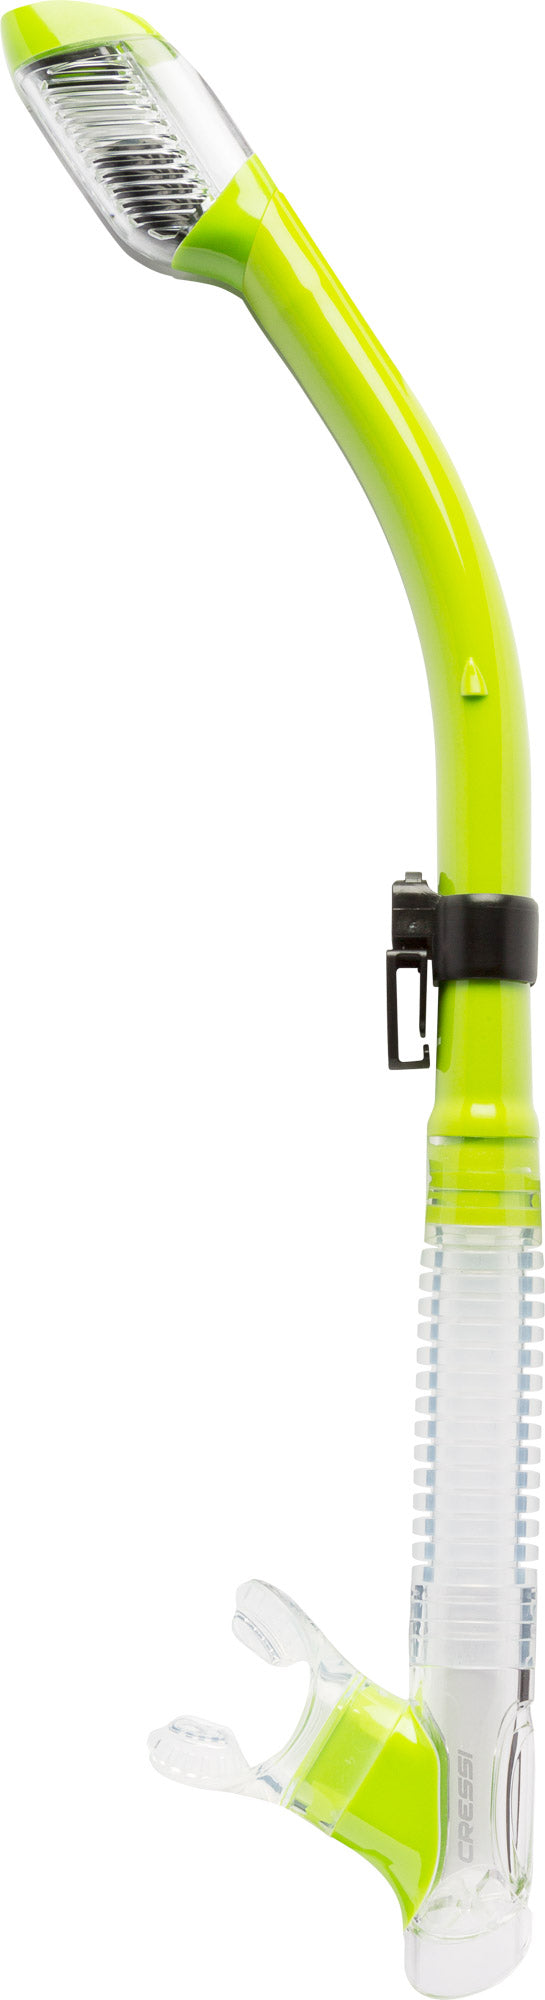 Cressi Adult Dry-Top Snorkel, Snorkeling Without Worry About Water - Tao Dry: Designed in Italy